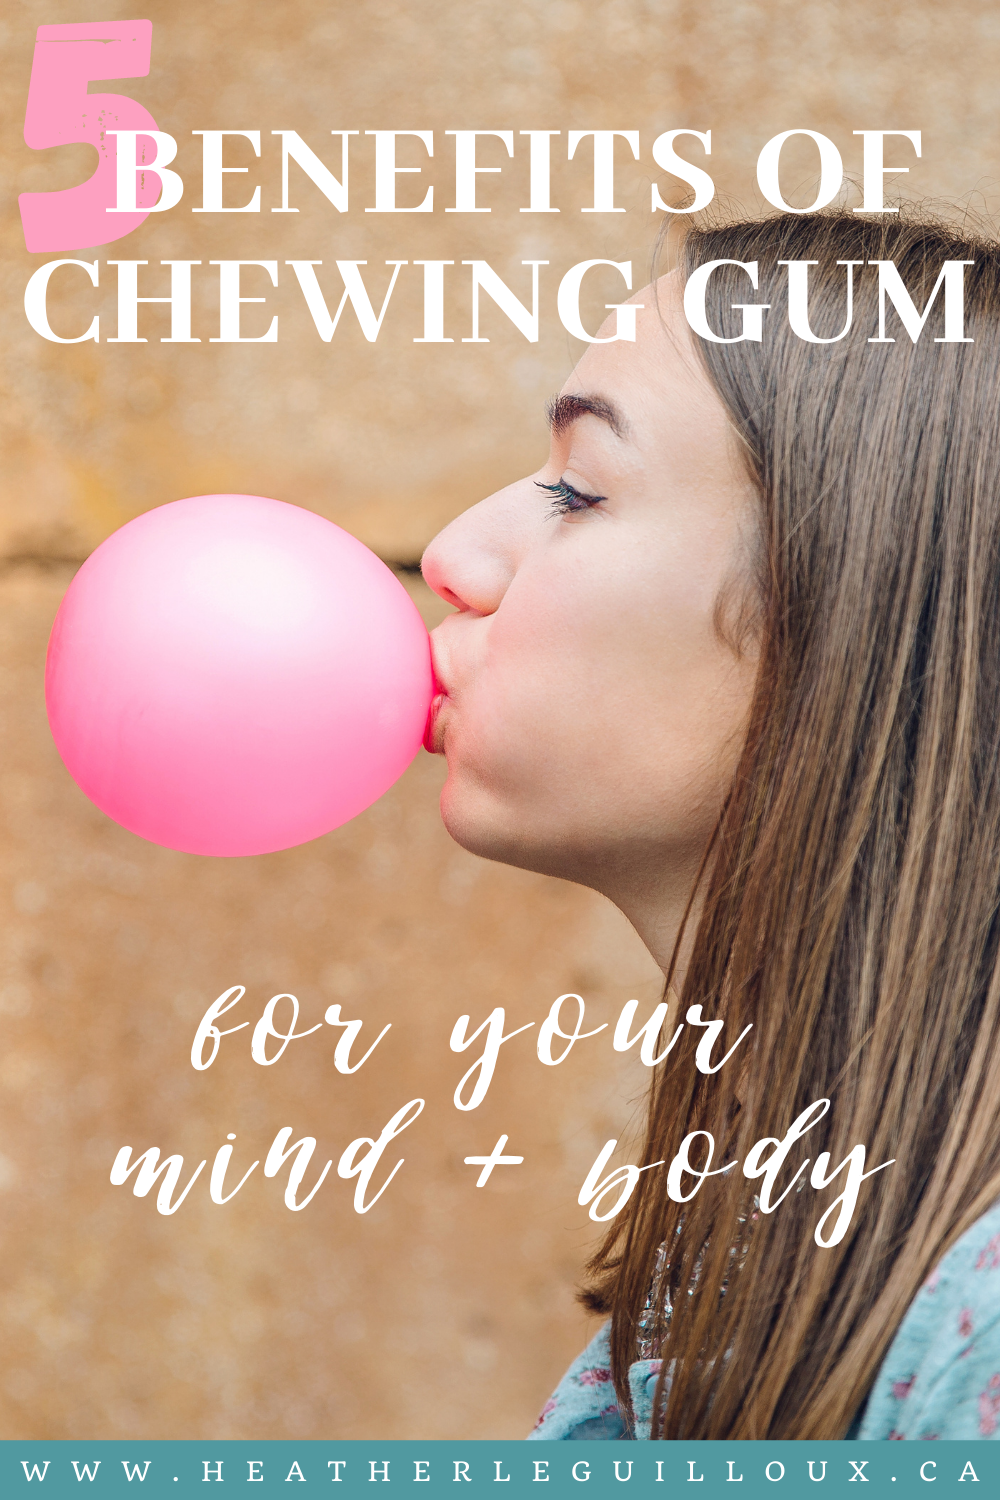 Today, chewing gum is part of many people's daily routines, including my own. We might chew to freshen breath or deal with earaches, but there’s actually many more health benefits that accompany this activity. Chewing gum fights stress, boosts mood, sharpens concentration, and lowers anxiety. It can also help with frustrating anxiety and stress symptoms like digestive problems, nausea, and dry mouth. Let's dive into the details these five benefits. #gum #anxiety #stress #digestion #health